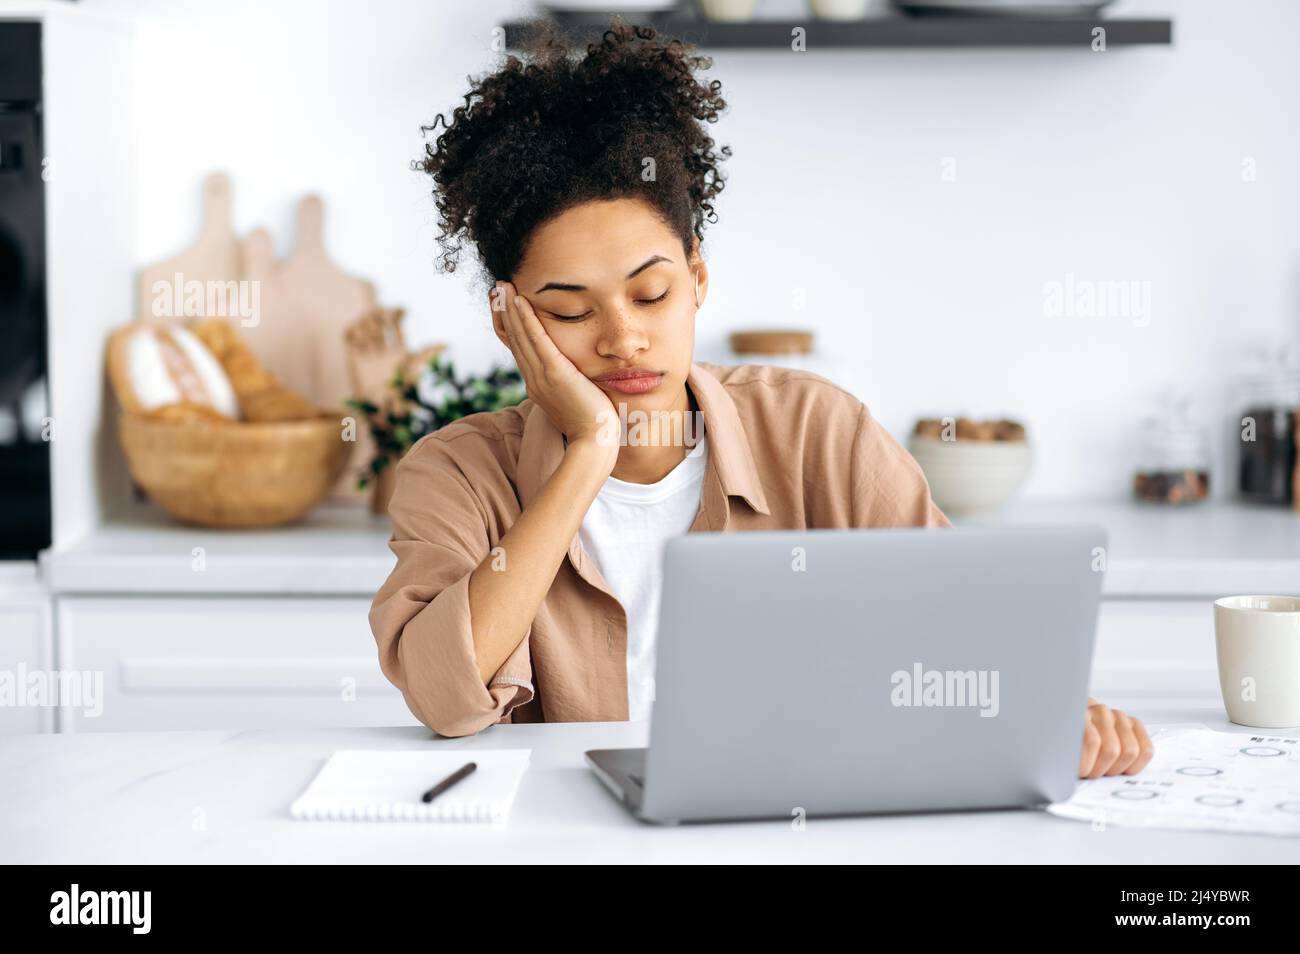 Exhausted african american girl with closed eyes, freelancer or student, working remotely from home, tired of boring online work, suffering from chronic fatigue, overwork, falls asleep at the desk Stock Photo